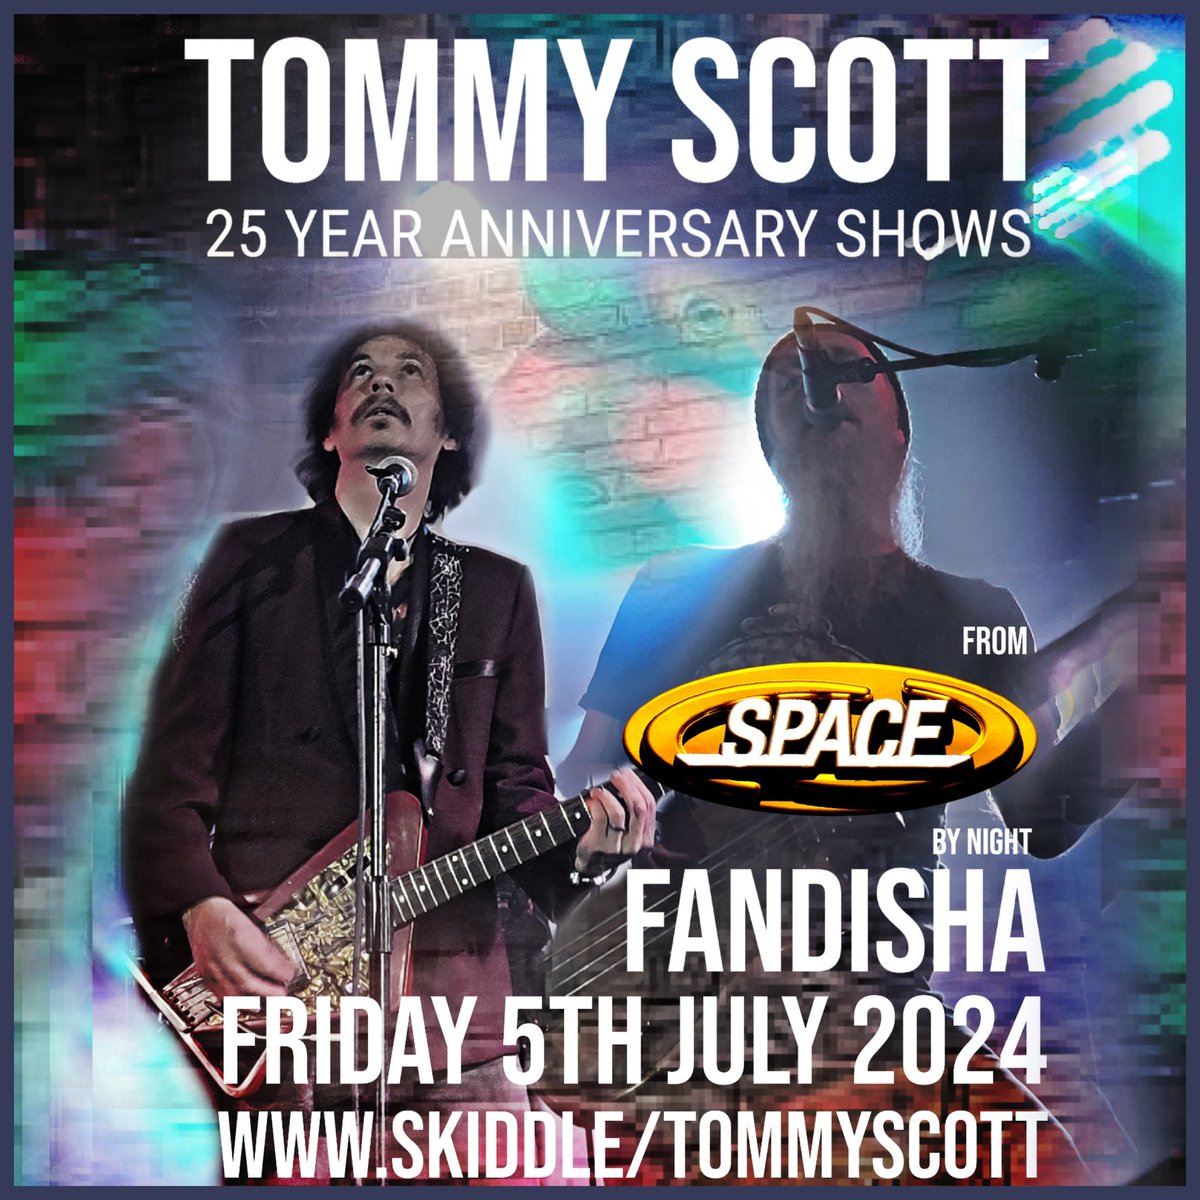 #FandishaByNight Friday 5th July 2024 @spacetommyscott @PhilHartleyBass More Than Half The Tickets Gone Grab Your's While You Can skiddle.com/whats-on/Liver…